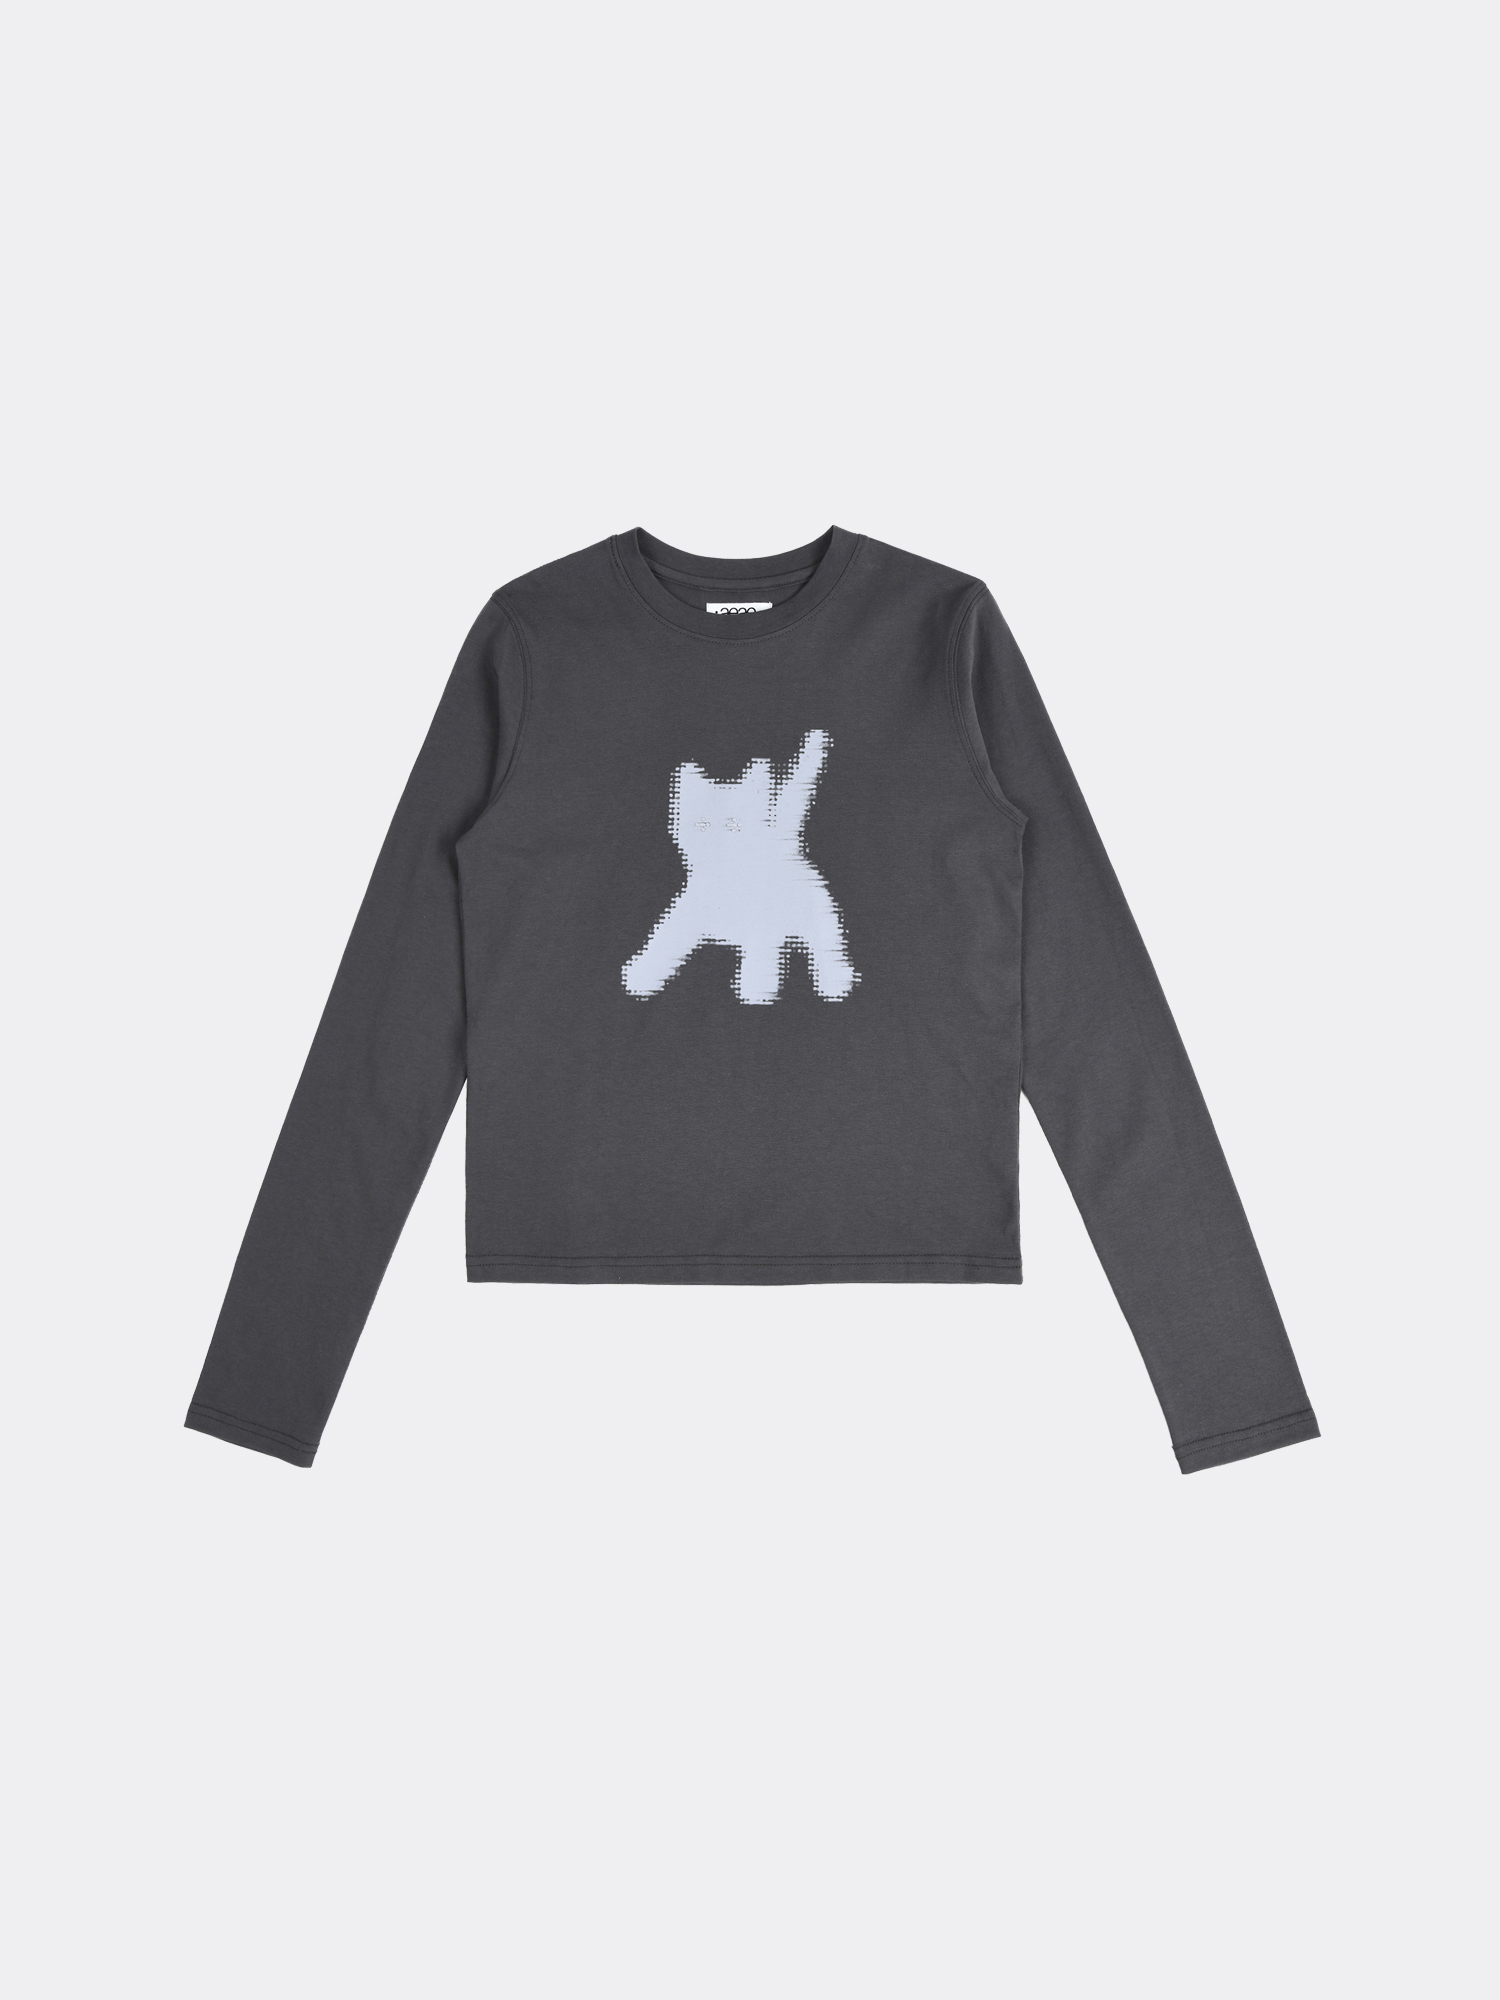 aeae FLASHED CATS EYE L/S-CHARCOAL